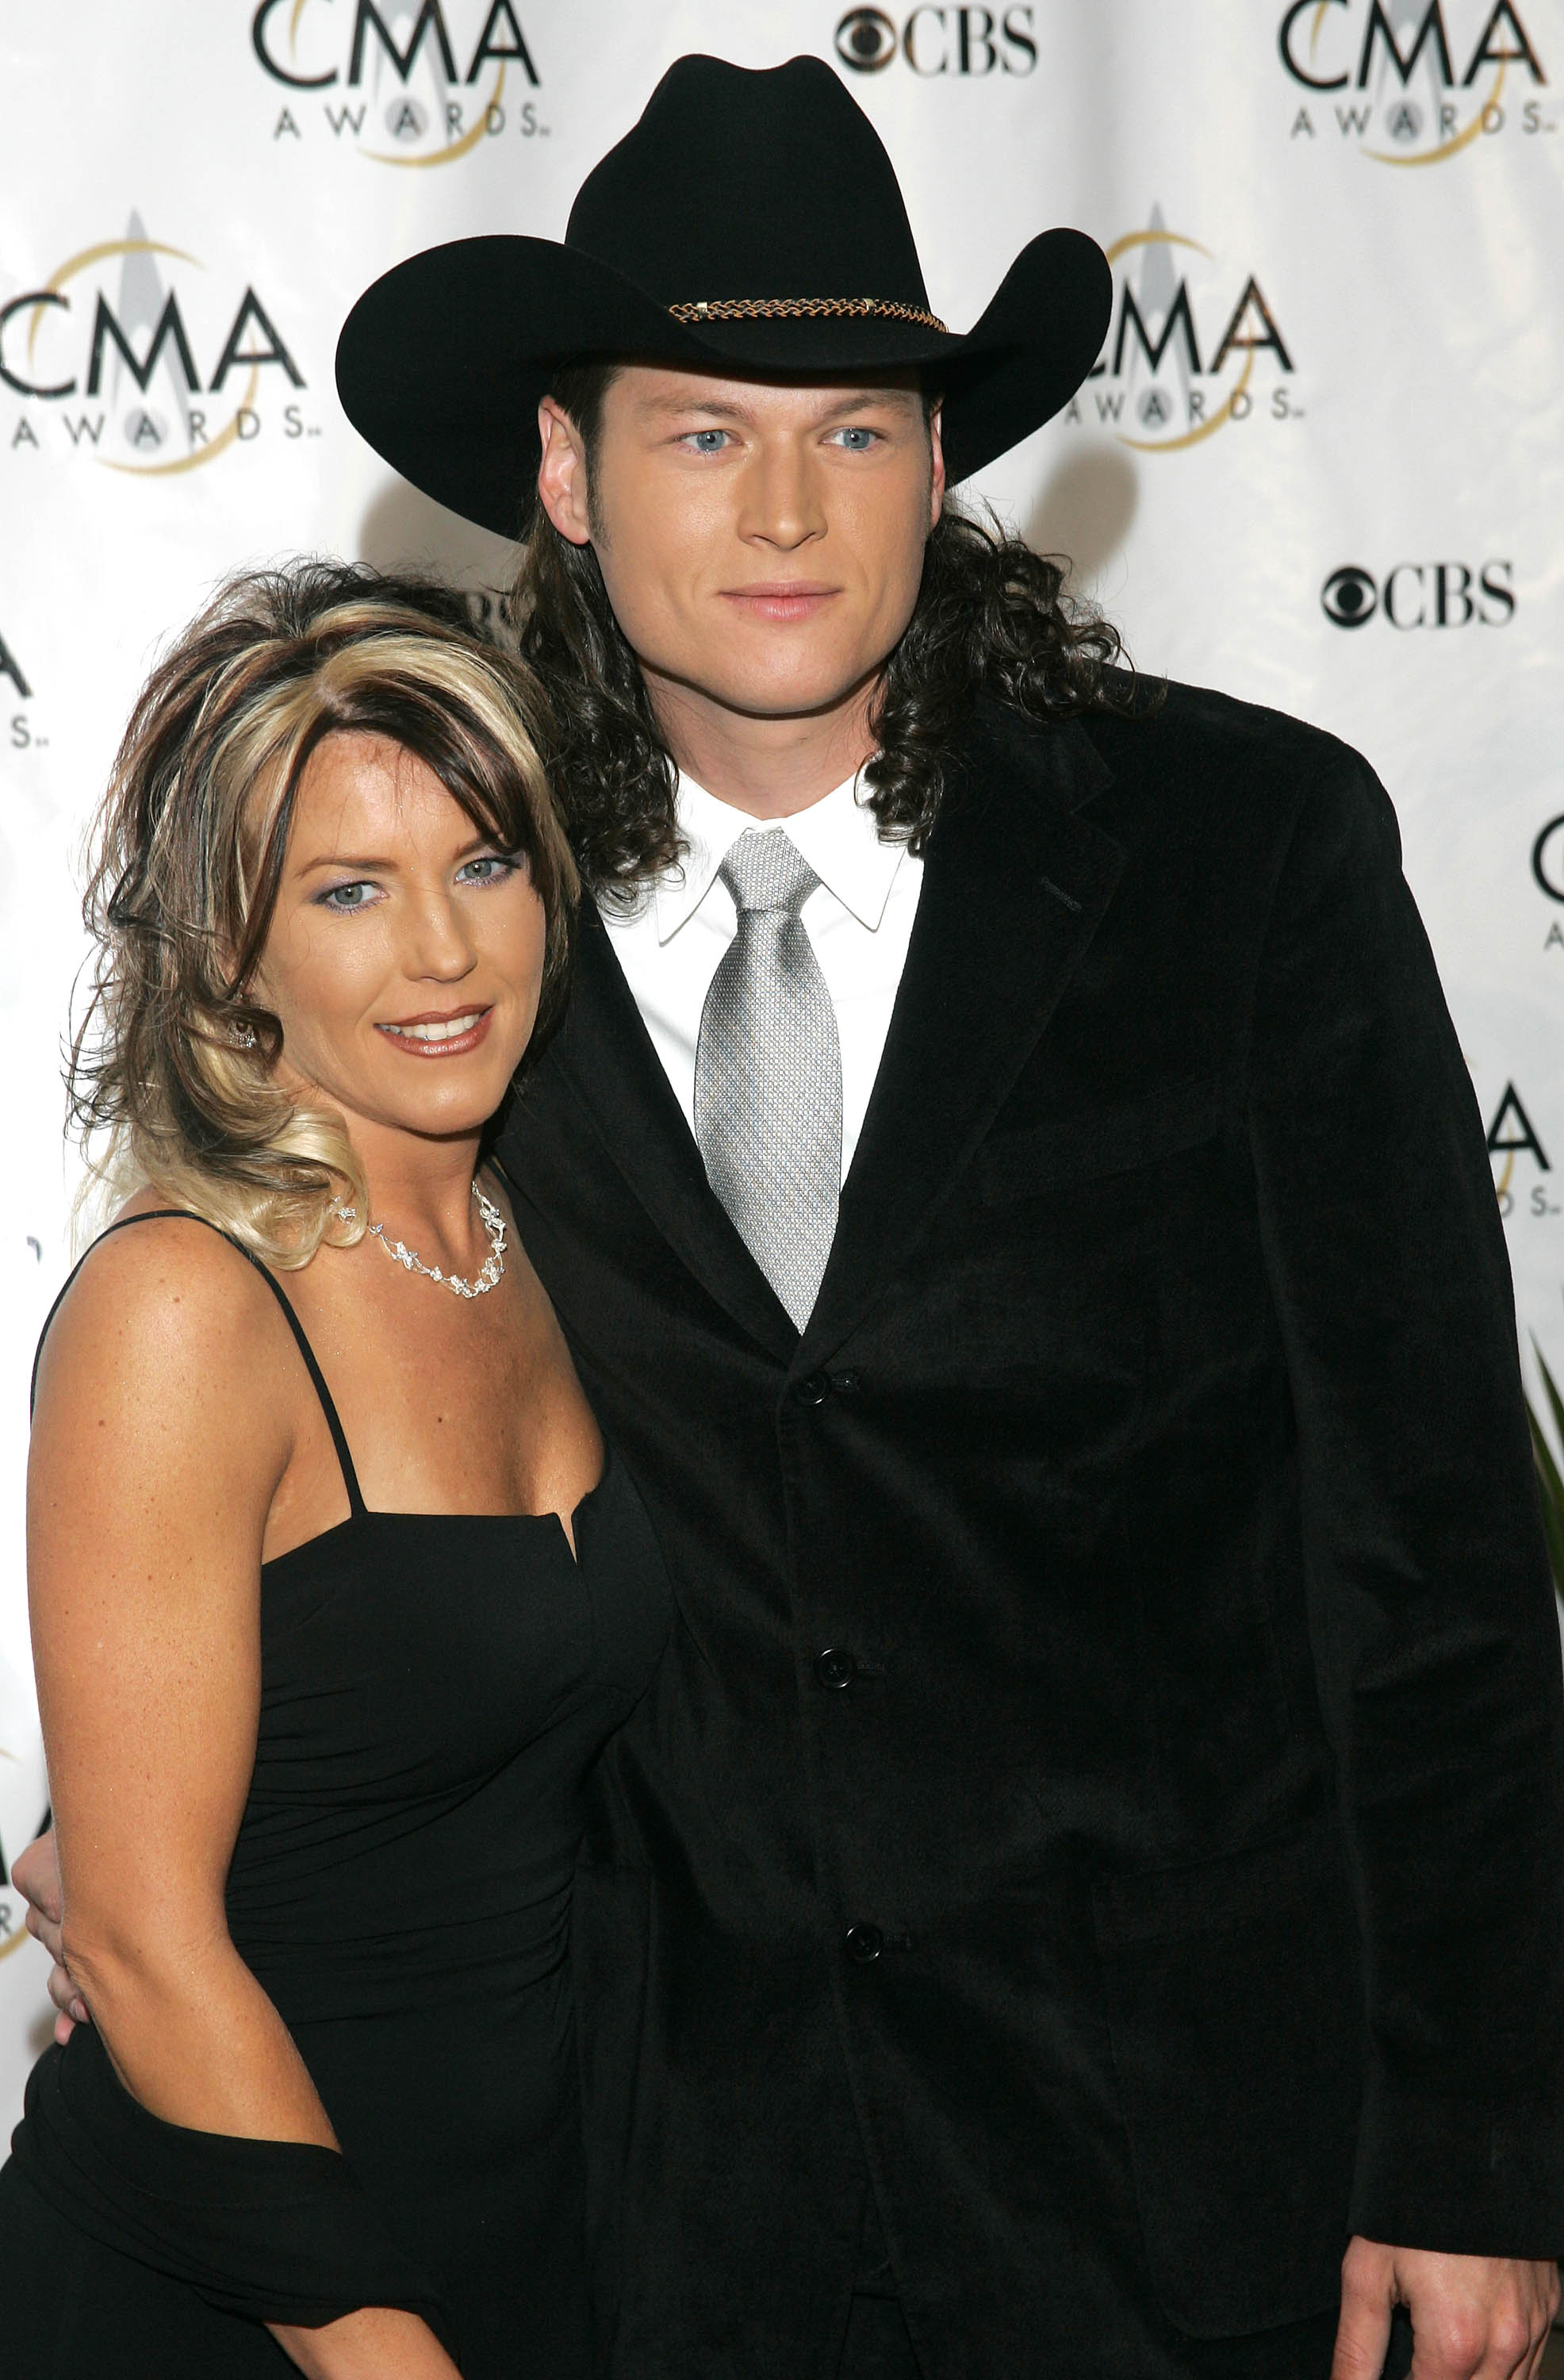 Kaynette Williams and Blake Shelton  at the 38th Annual Country Music Awards in Nashville, Tennessee on November 9, 2004 | Source: Getty Images